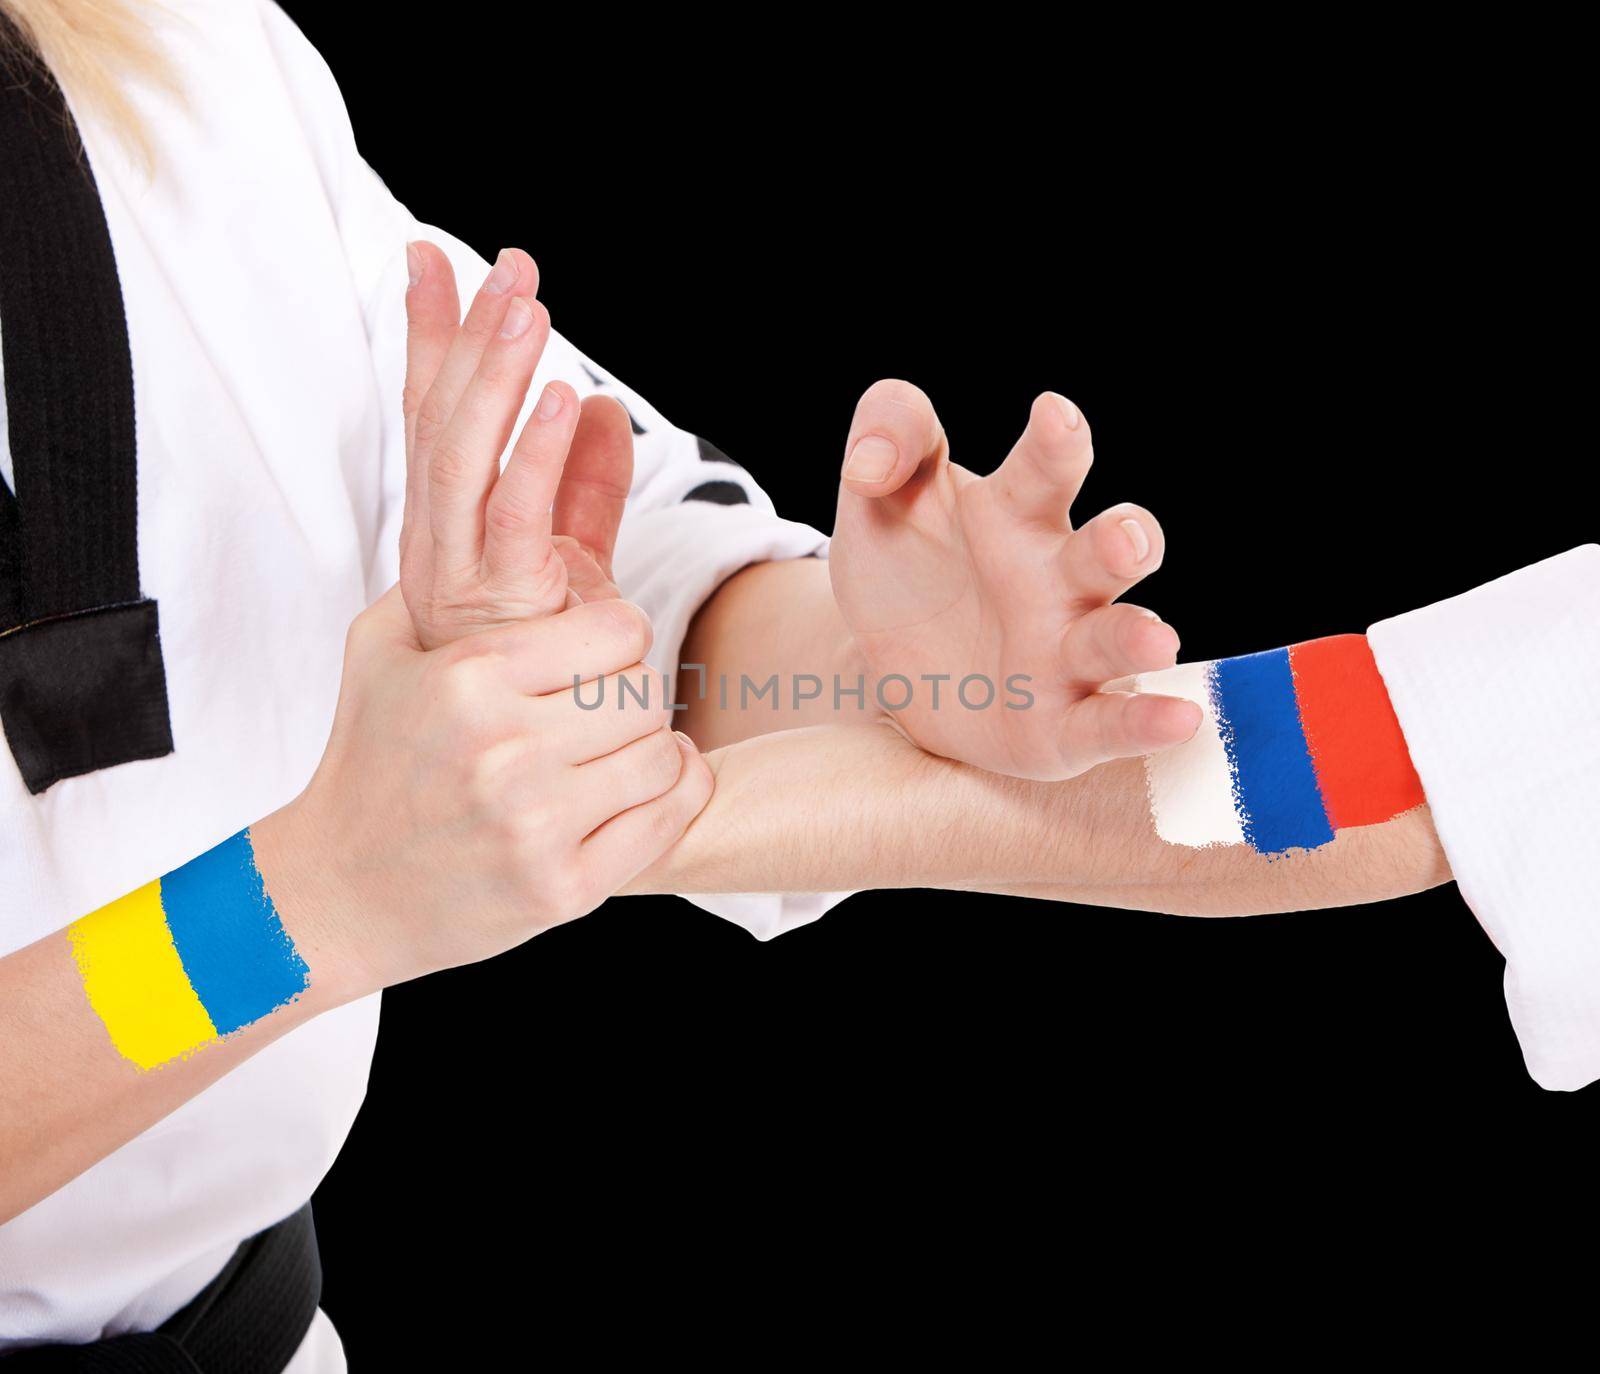 Power takeover Ukraine and Russia two fighting hands of representatives of different countries. Hold hands of two fighting people isolated on black background.